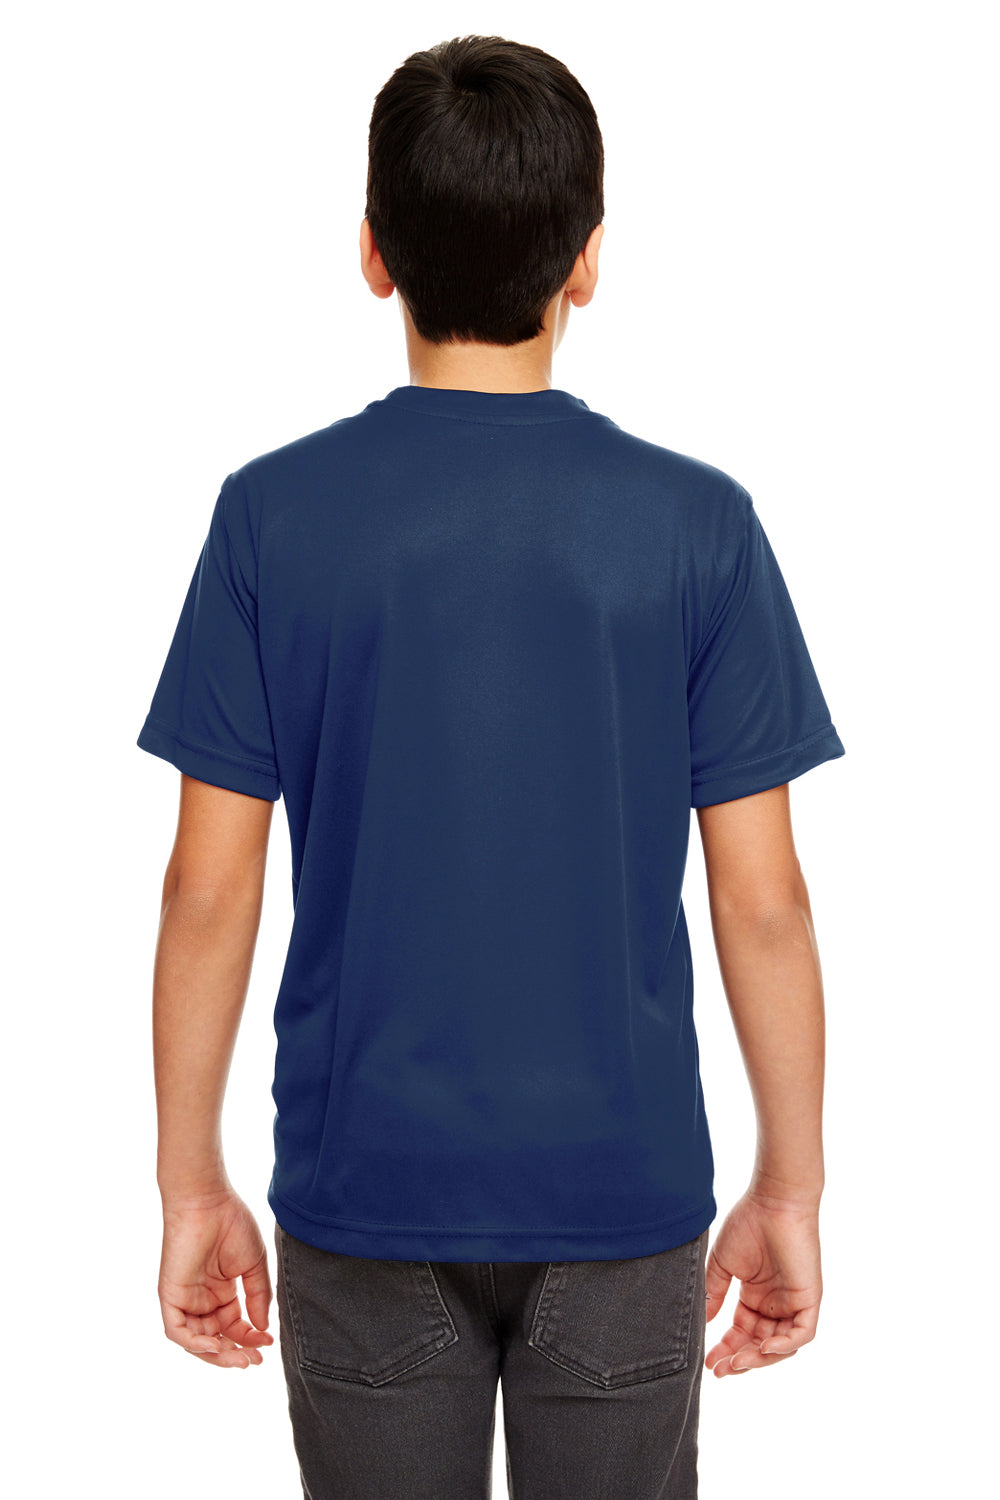 UltraClub 8620Y Youth Cool & Dry Performance Moisture Wicking Short Sleeve Crewneck T-Shirt Navy Blue Back